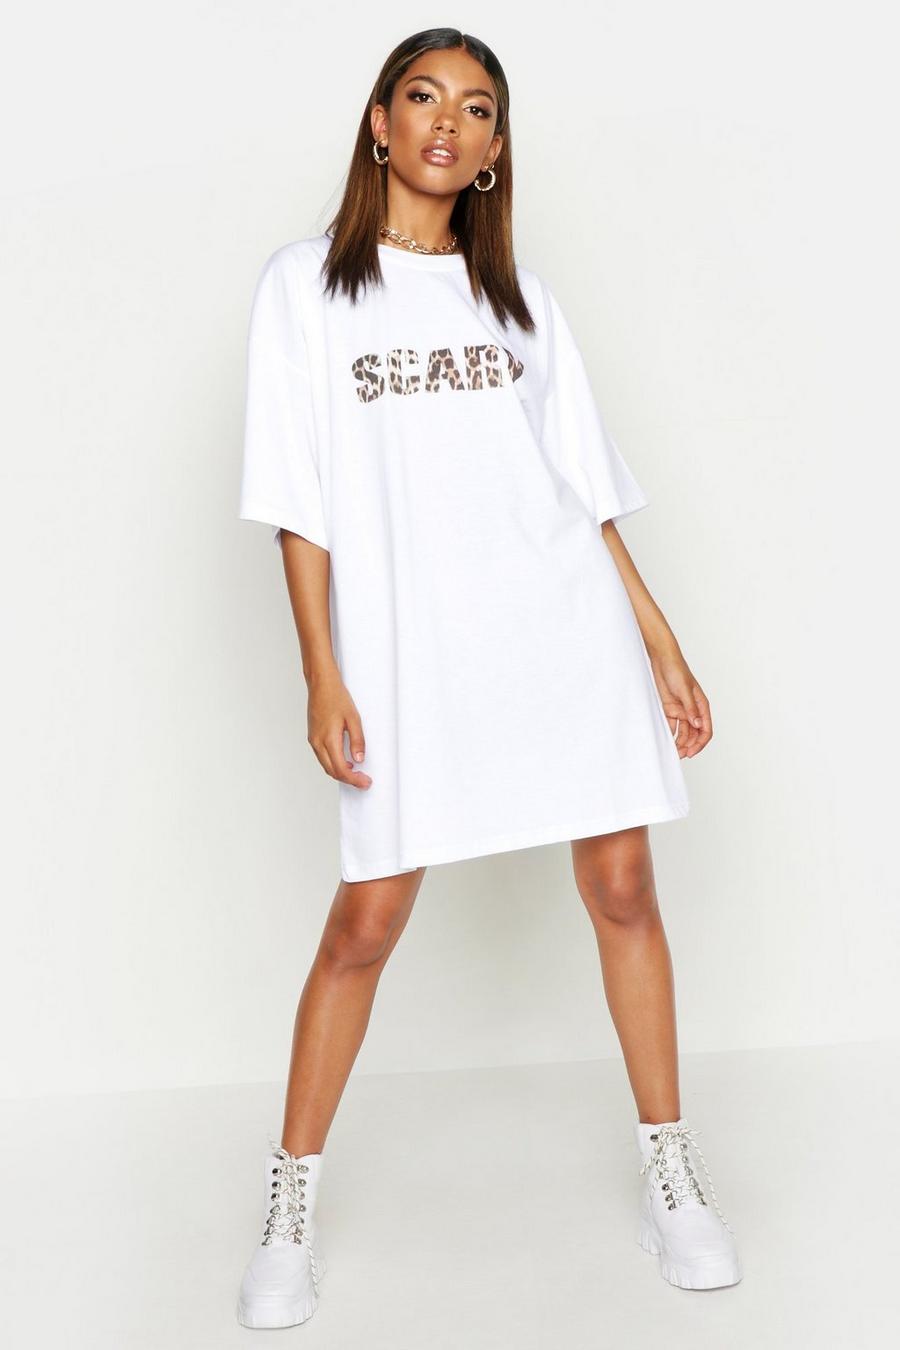 Abito t-shirt oversize con scritta “Scary” image number 1